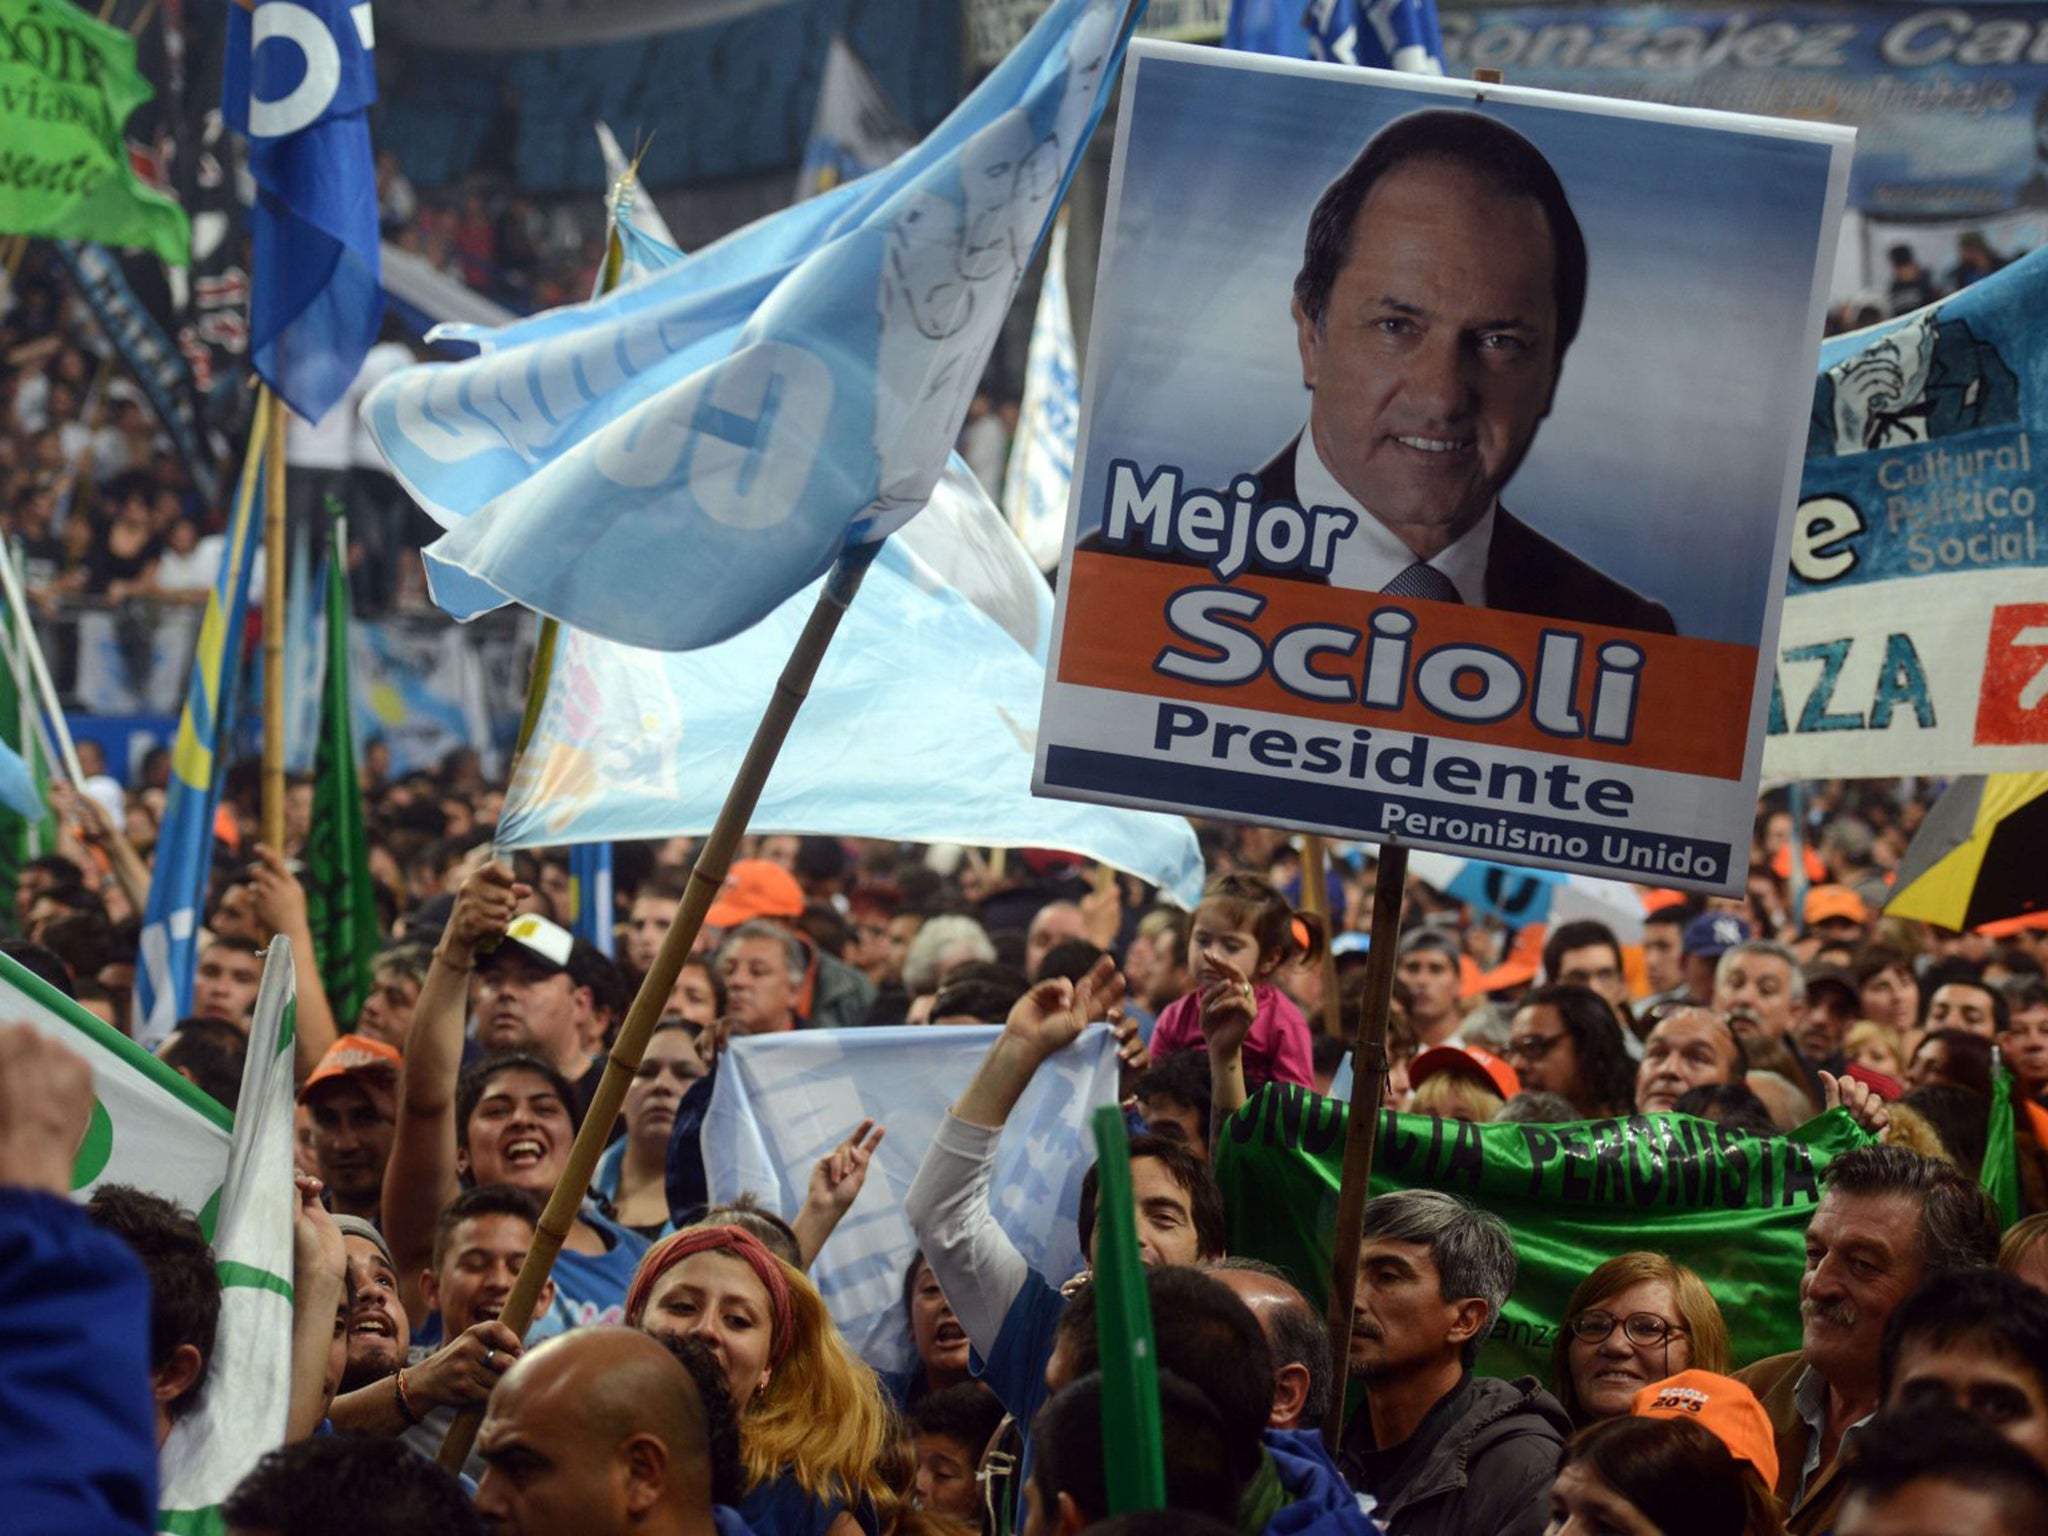 Polls suggest that Daniel Scioli of the Front for Victory party wll lose to the opposition leader, Mauricio Macri